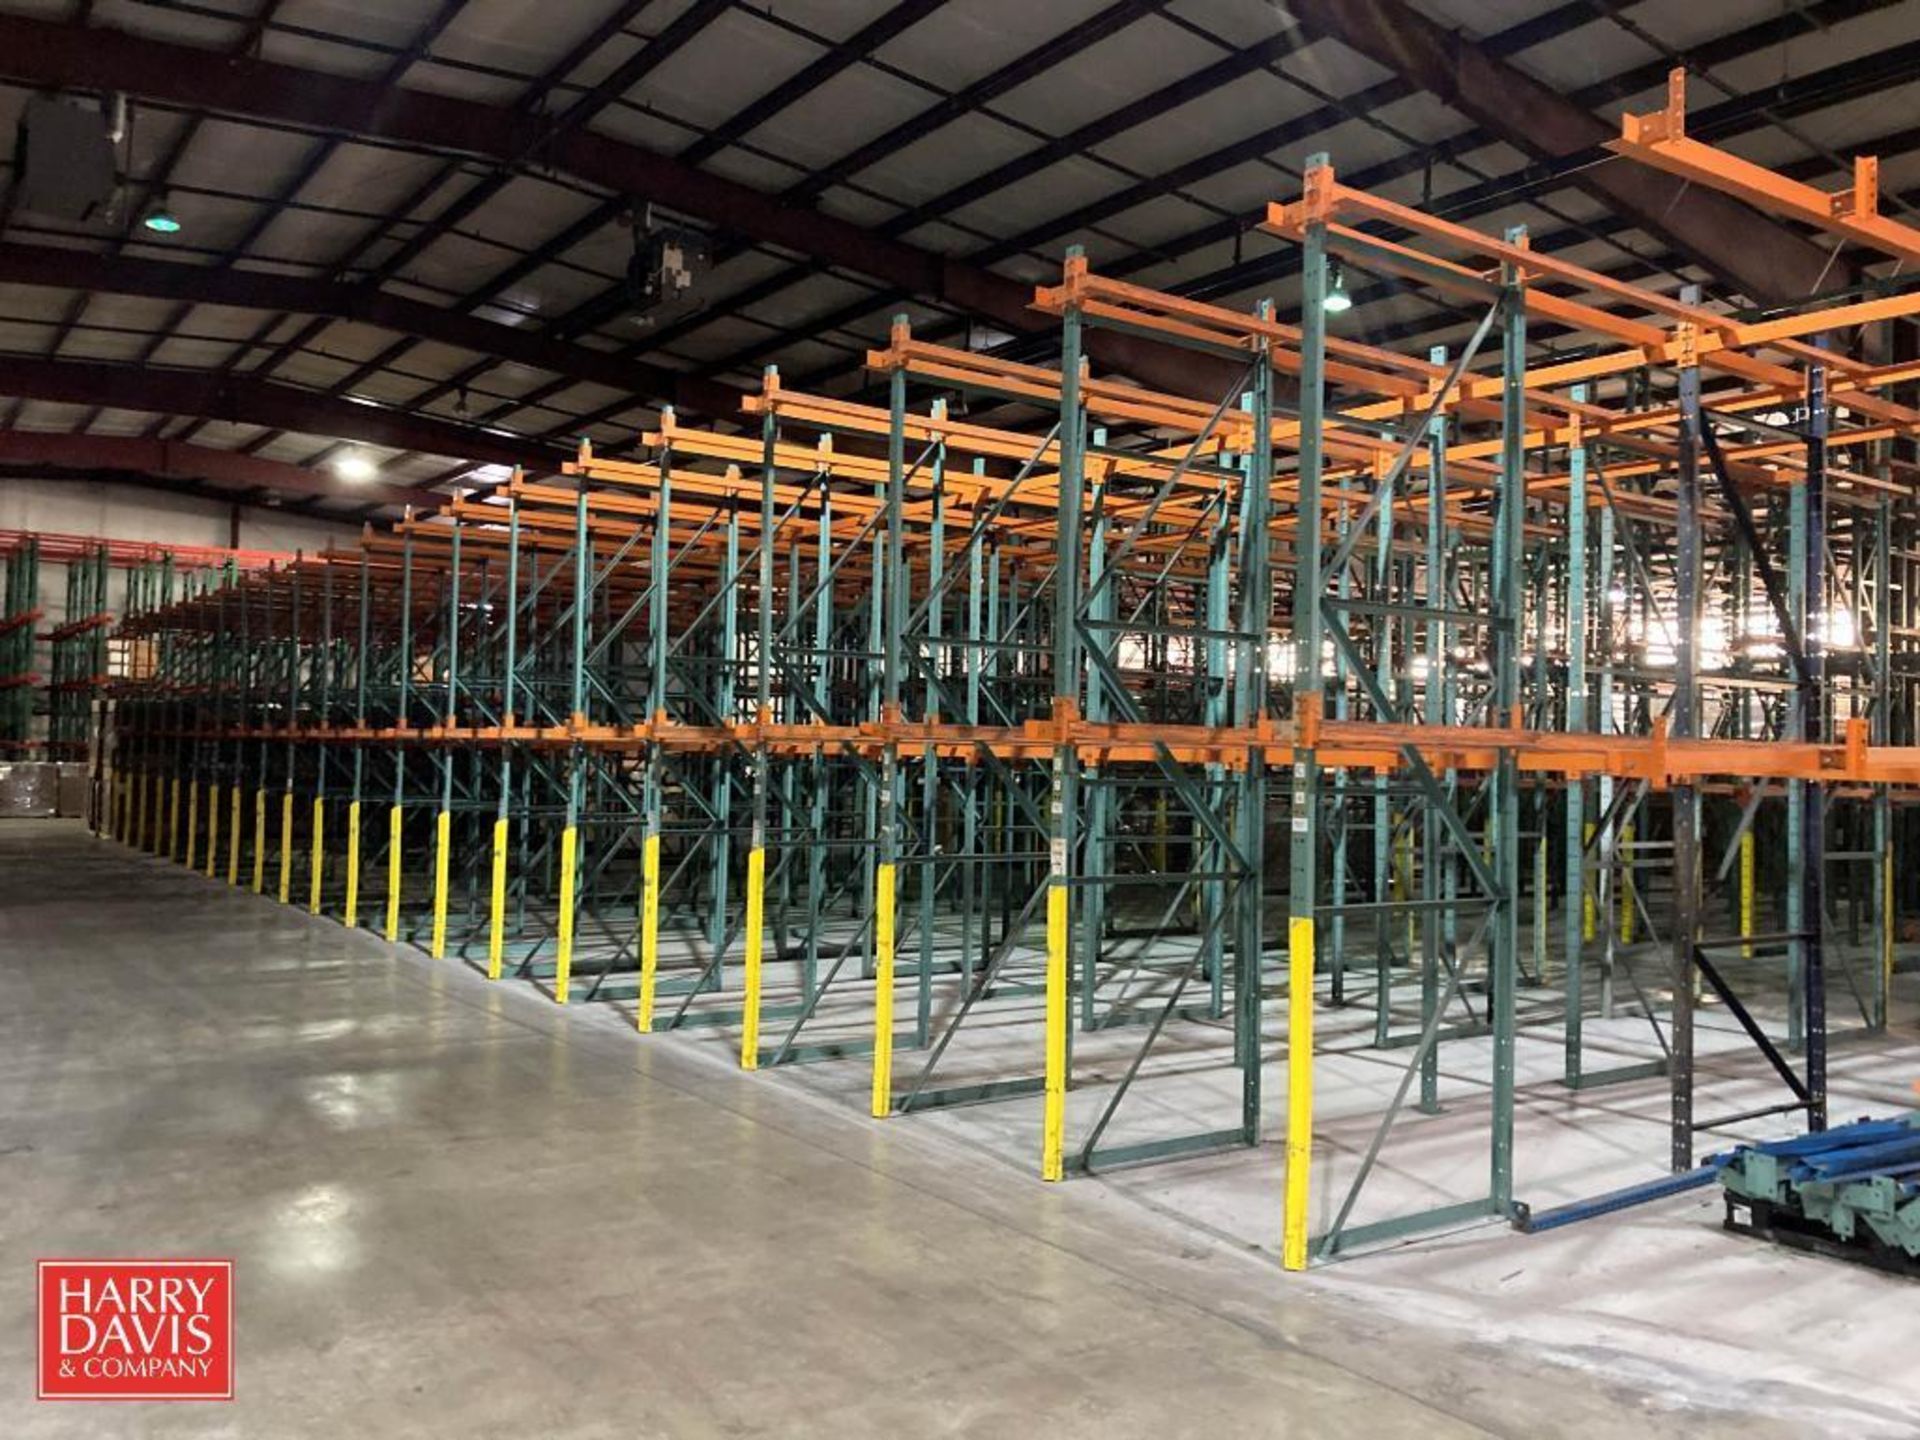 Bays, Drive-In Pallet Racking, 3 High - 18 Pallet Spaces Each (Location: Little Rock, AR)